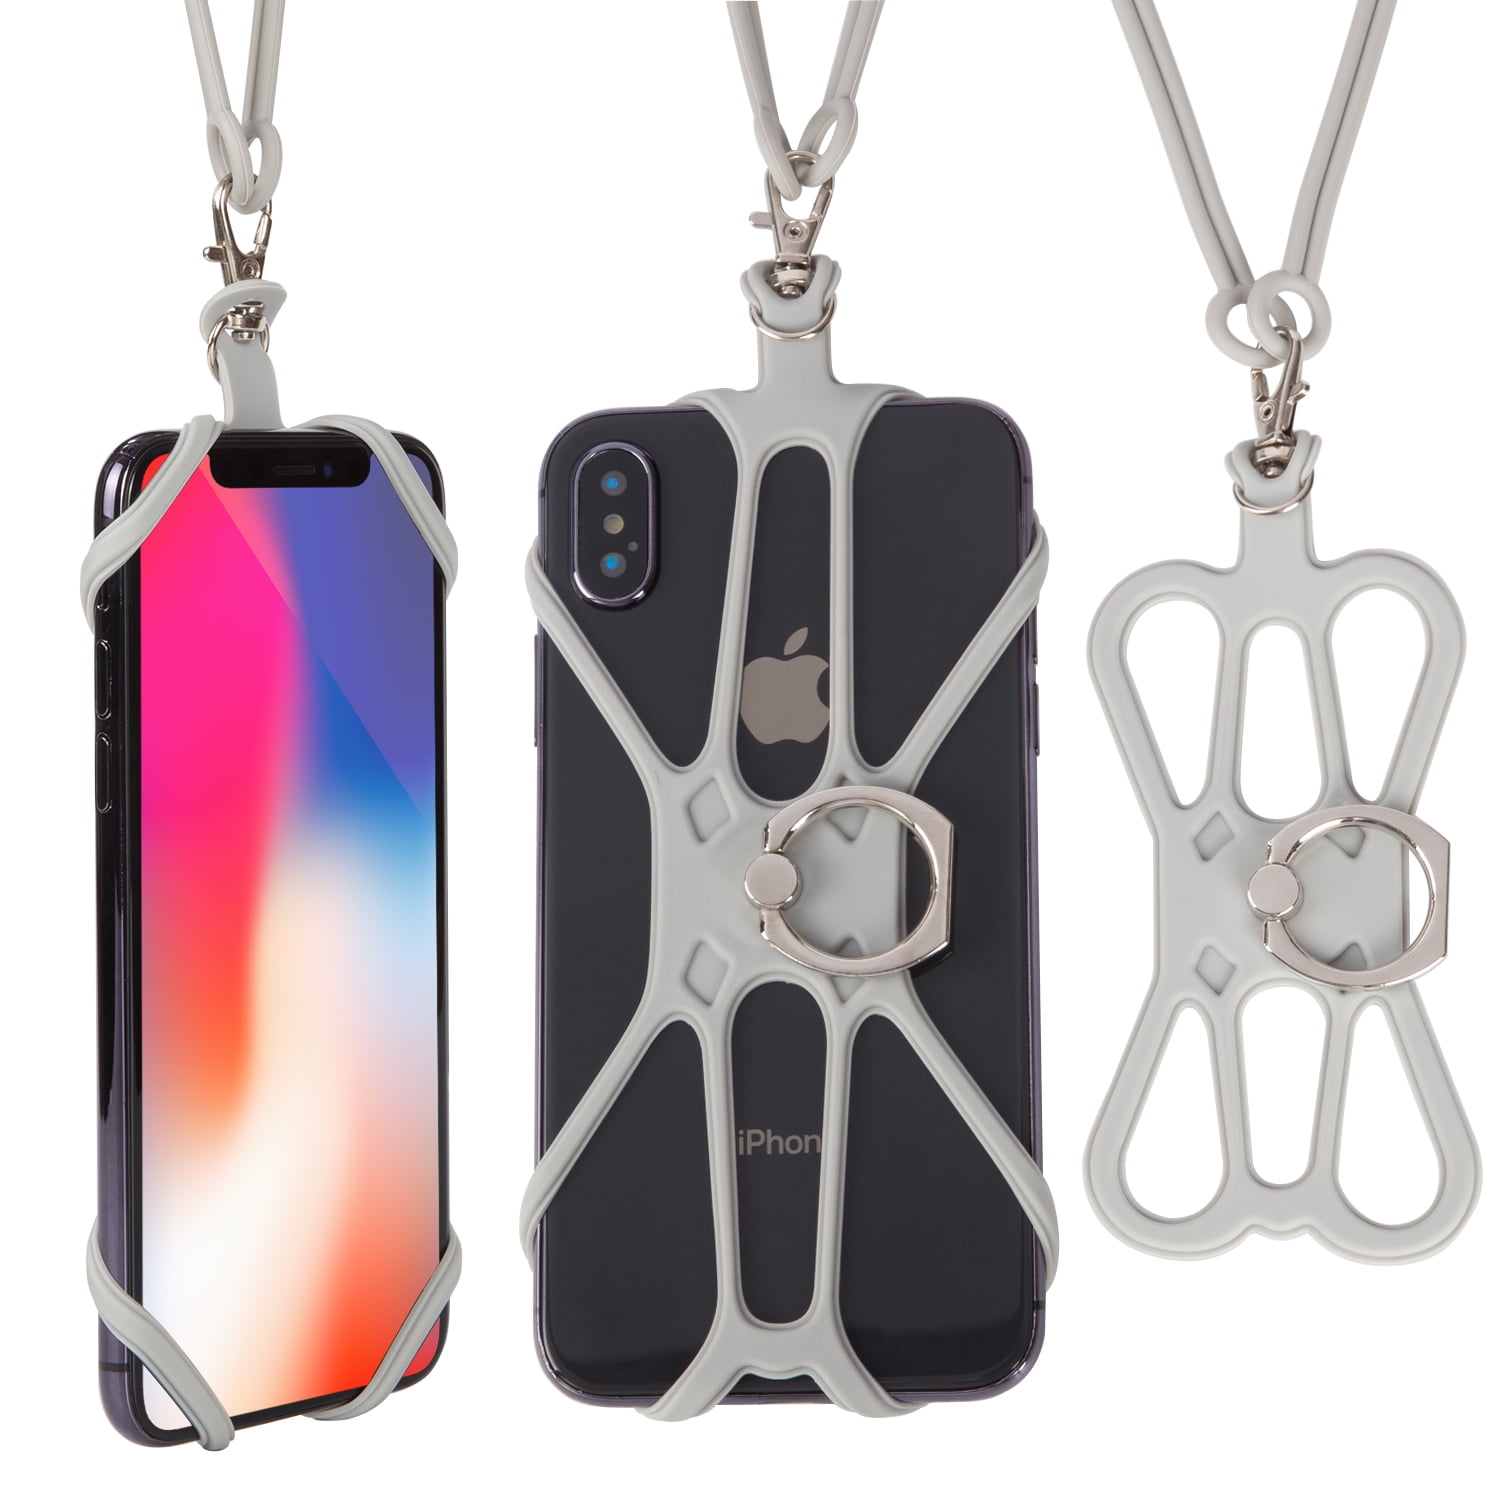 White SHANSHUI Phone Lanyard Detachable Neck Stretchy Lanyard Silicone Case Finger Ring Stand with Detachable Neck Strap Universal for iPhone X XS SE 5s 5 6 7 8 Plus and Most Smart Phones